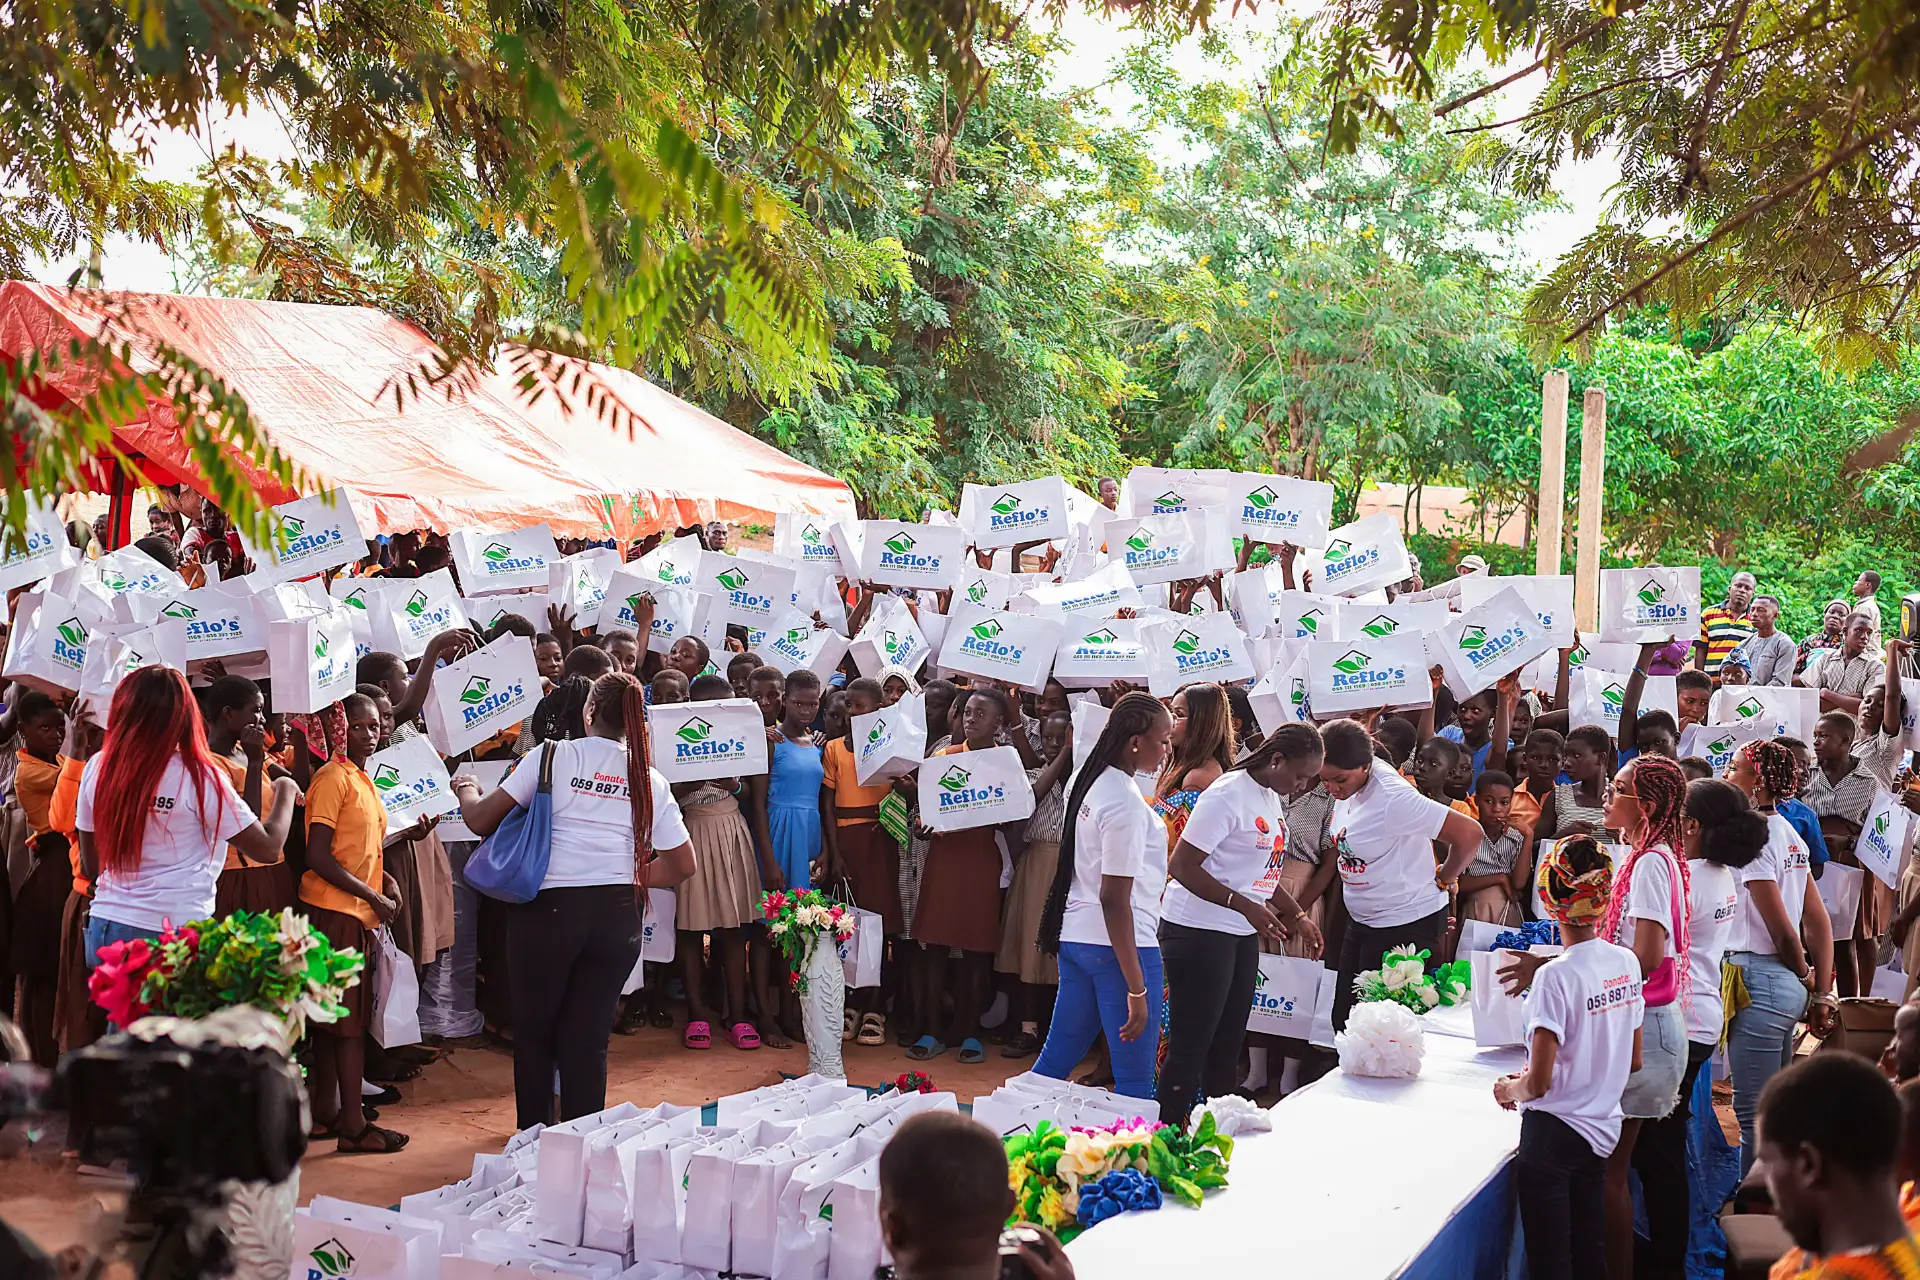 Reflo Company Ltd And The Florence Mensah Foundation’s “1000 Girls” Project Donates Reflo’s Sanitary Pads To 213 Girls In Assin Ochiso D/C Junior High School.